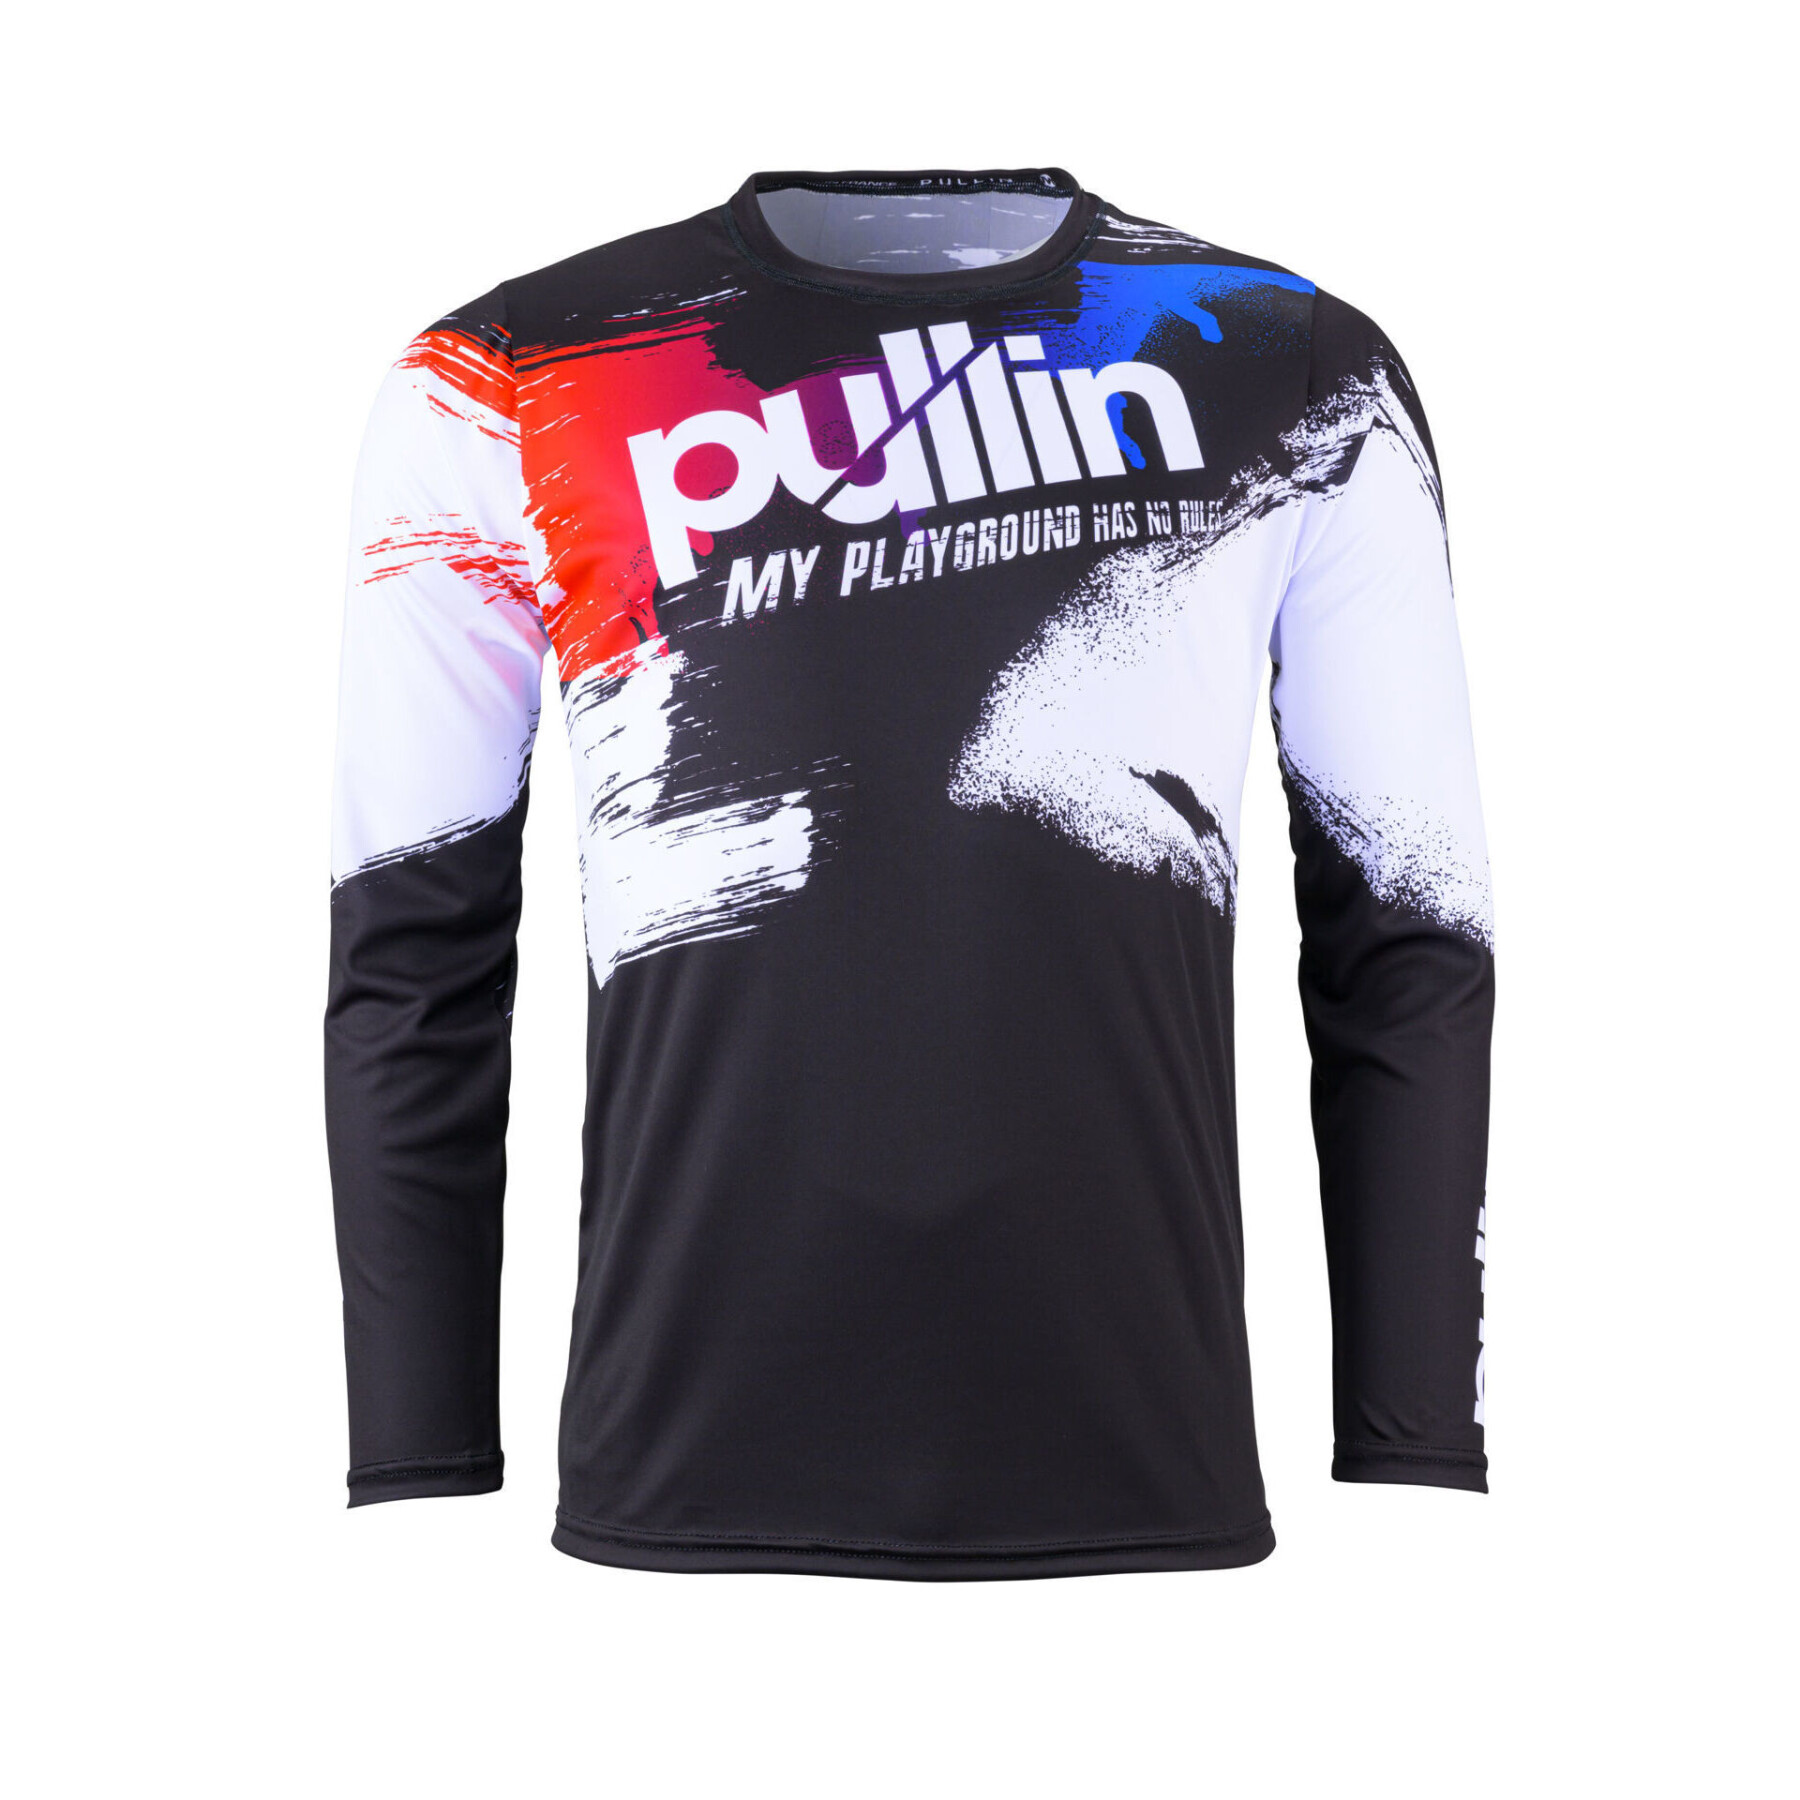 Maillot Pull-in moto Challenger Race